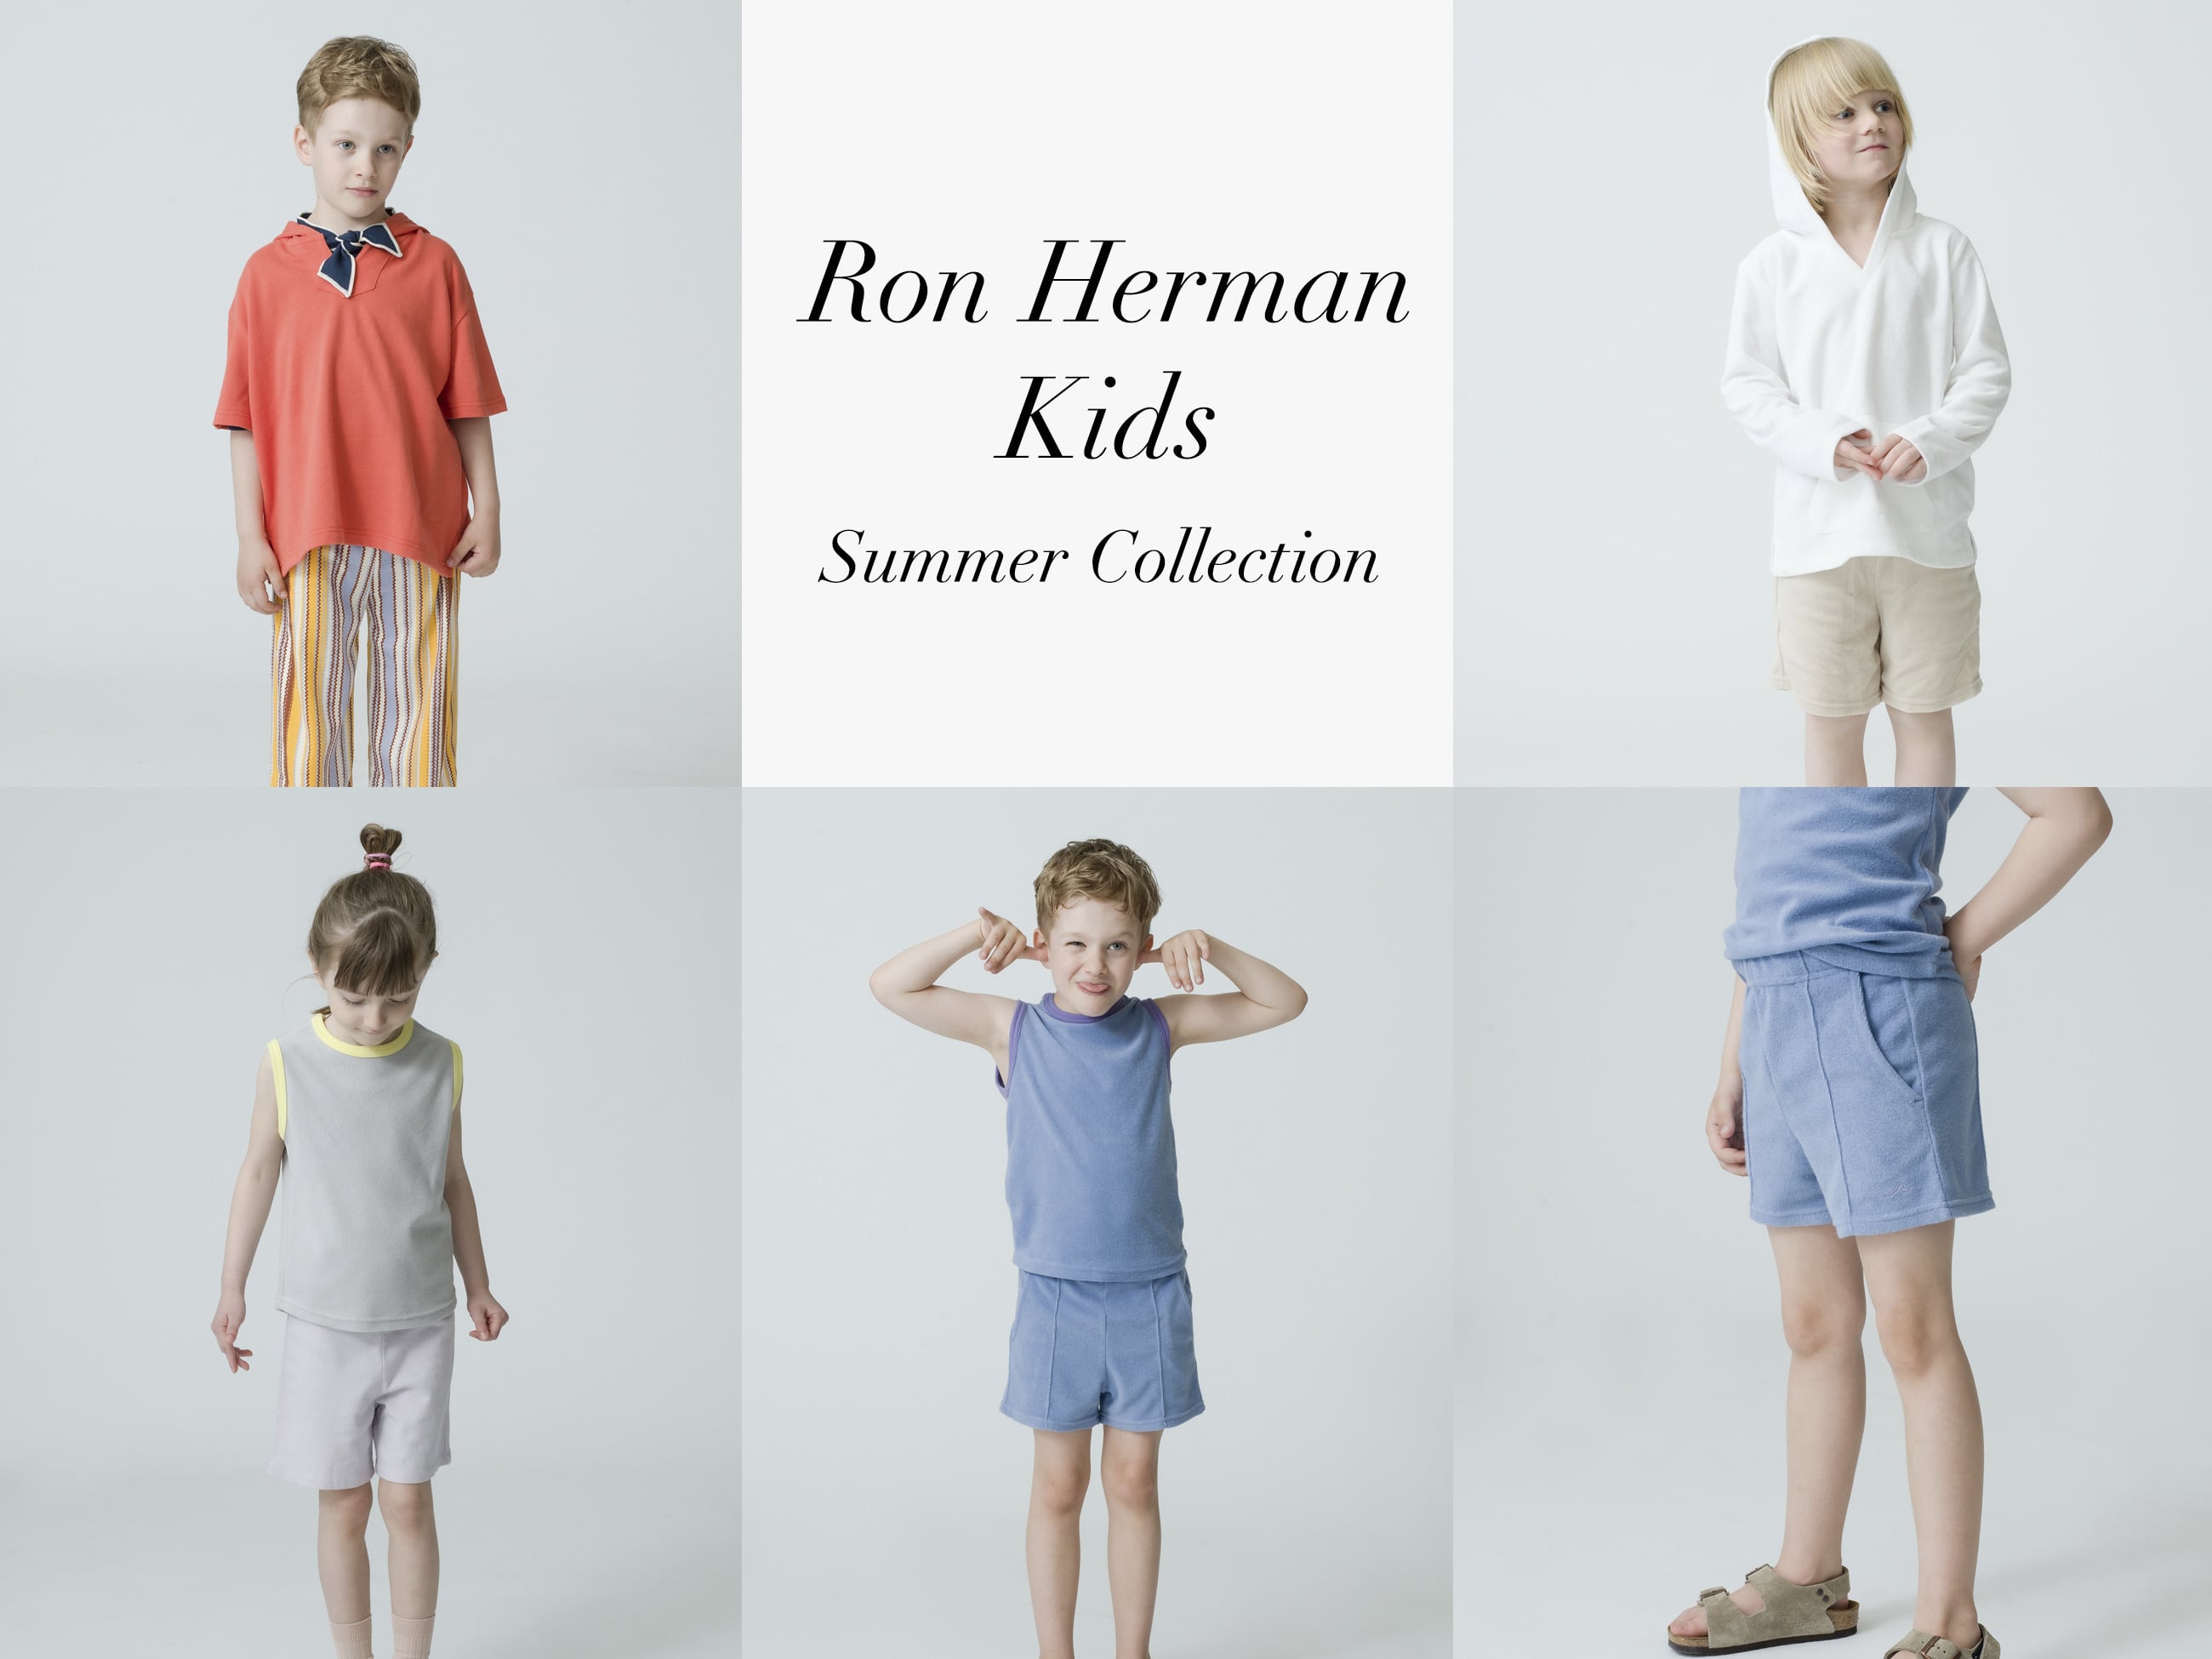 Ron Herman Kids Summer Collection